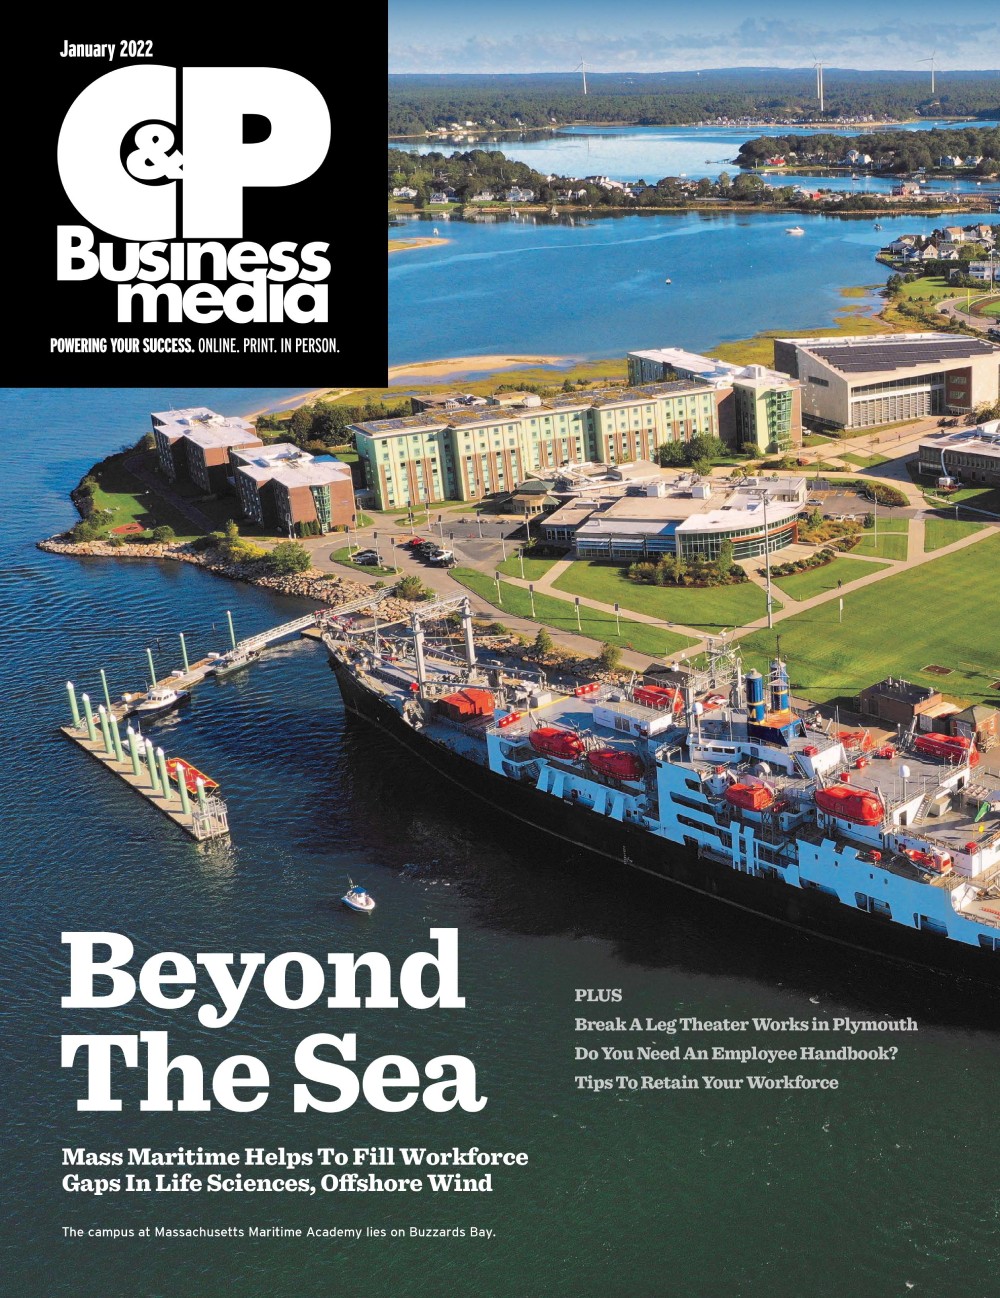 January 2022 Edition Cover – New Directions – By the Sea